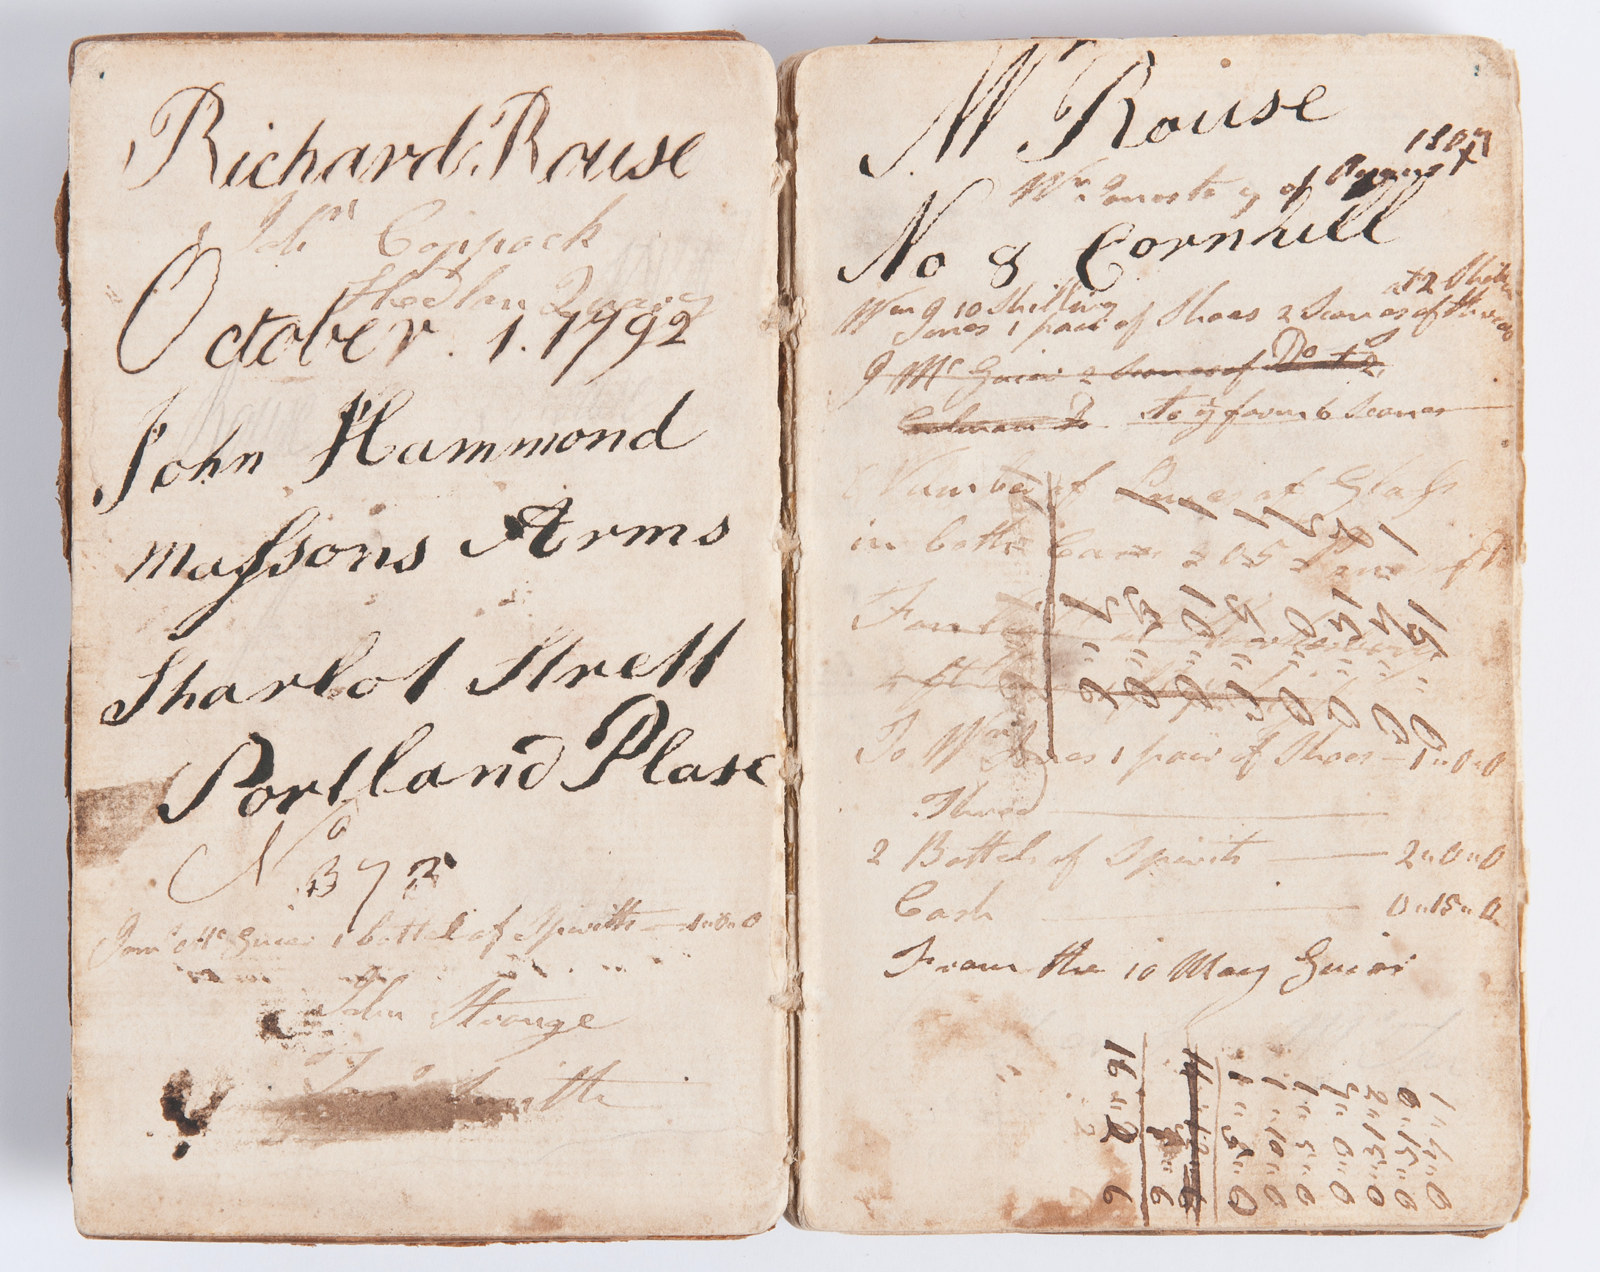 Richard Rouse and Rouse family papers : [collection of documents presented to the Caroline Simpson Library & Research Collection in 2011 by Ann, Angus & Jamie Lidstone, direct descendants of Richard Rouse (1774-1852)]